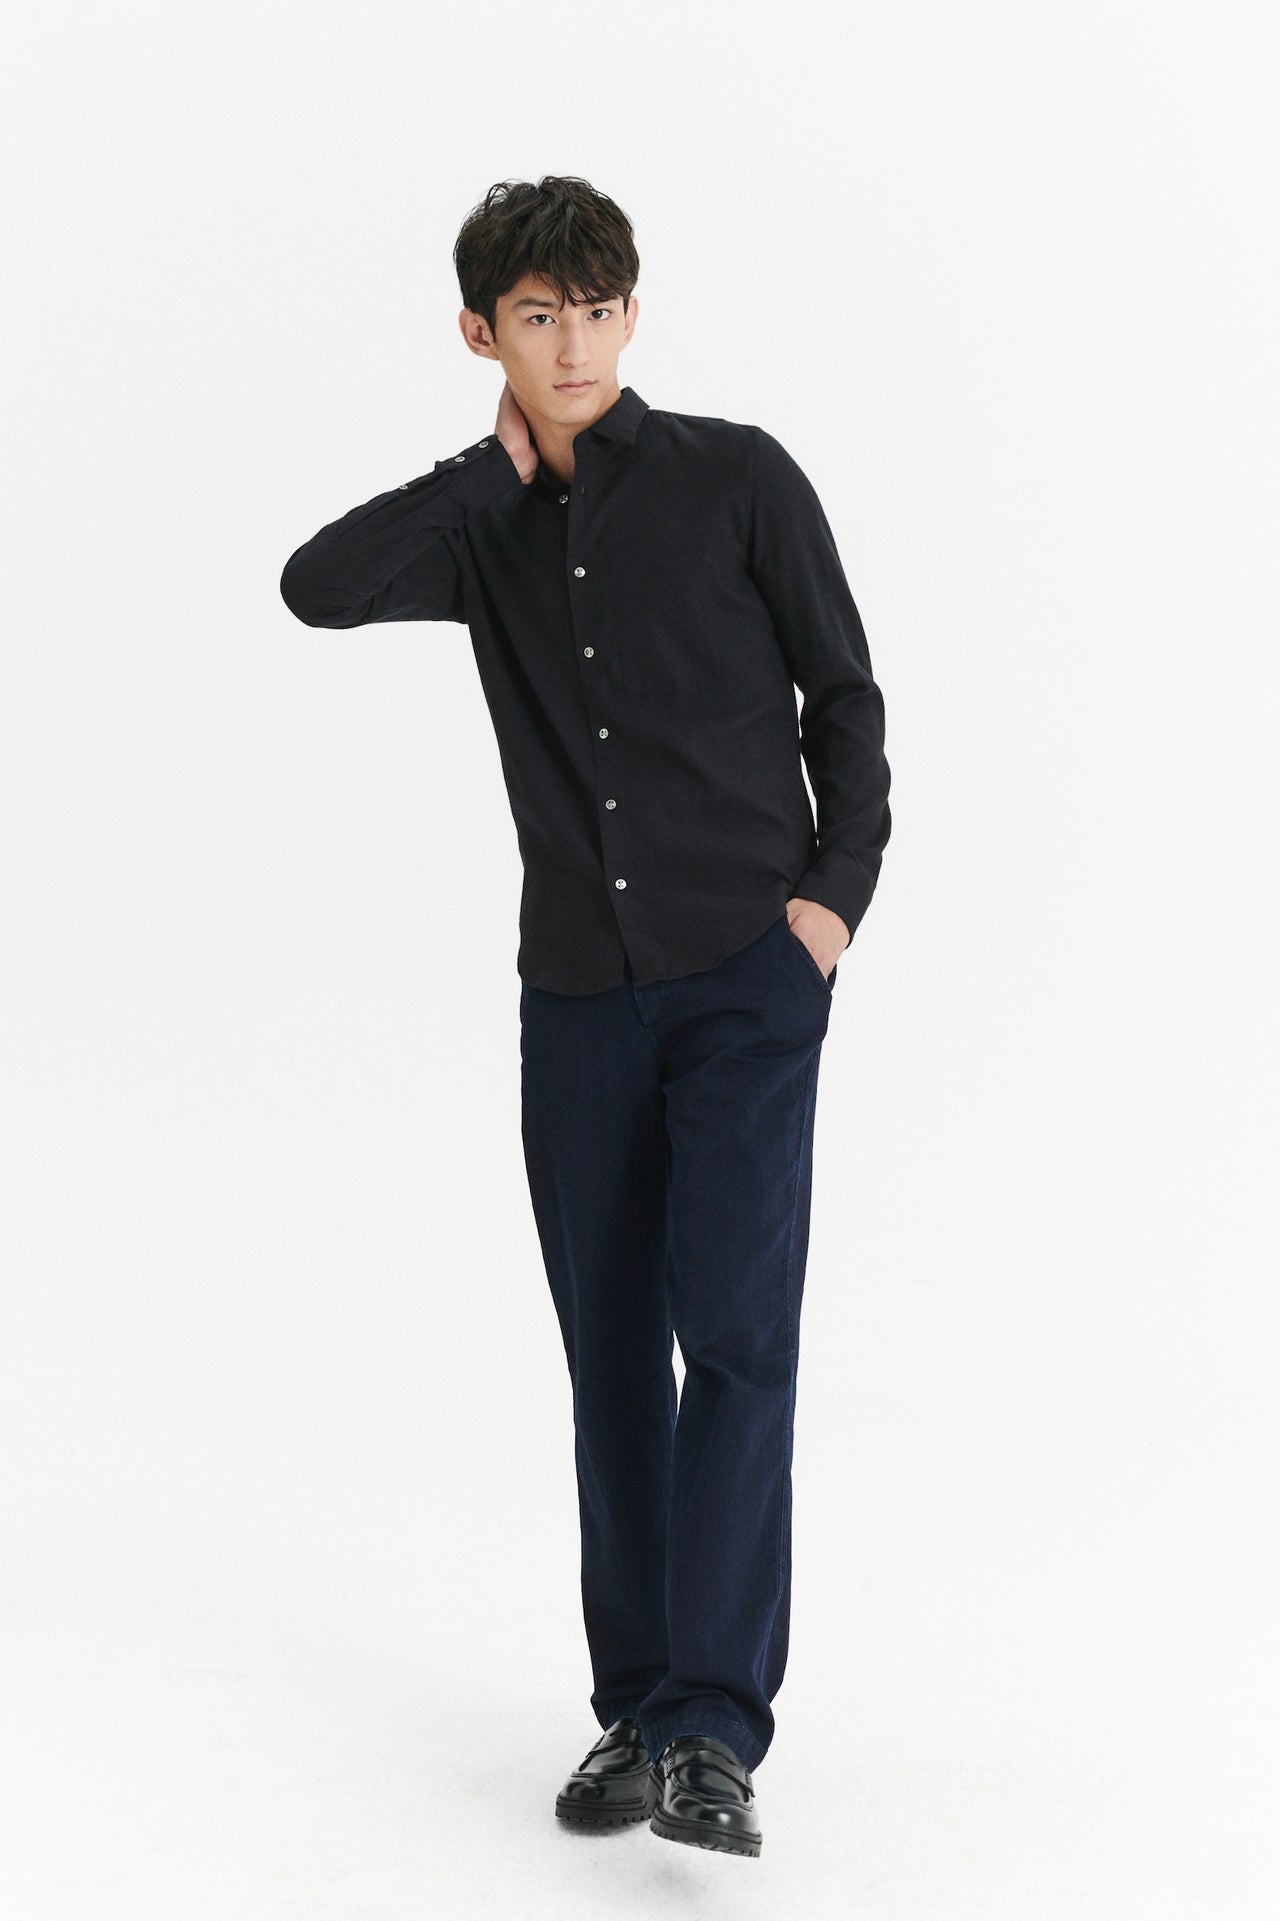 Restock - Feel Good Shirt in a Black Fine Soft Portuguese Lyocell and Cotton Flannel